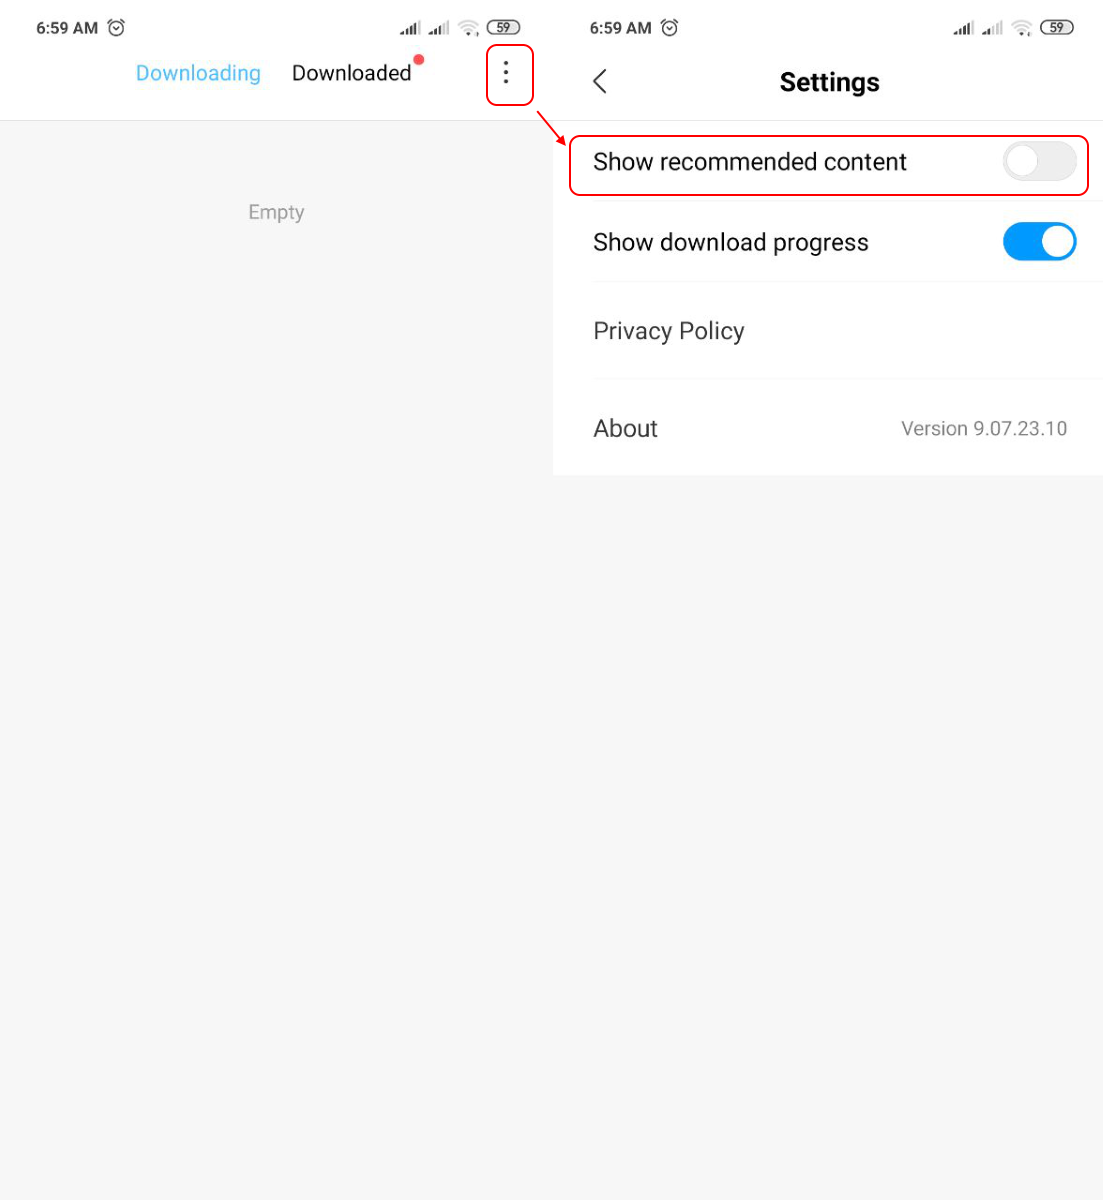 Disabling ads in the Xiaomi app Download